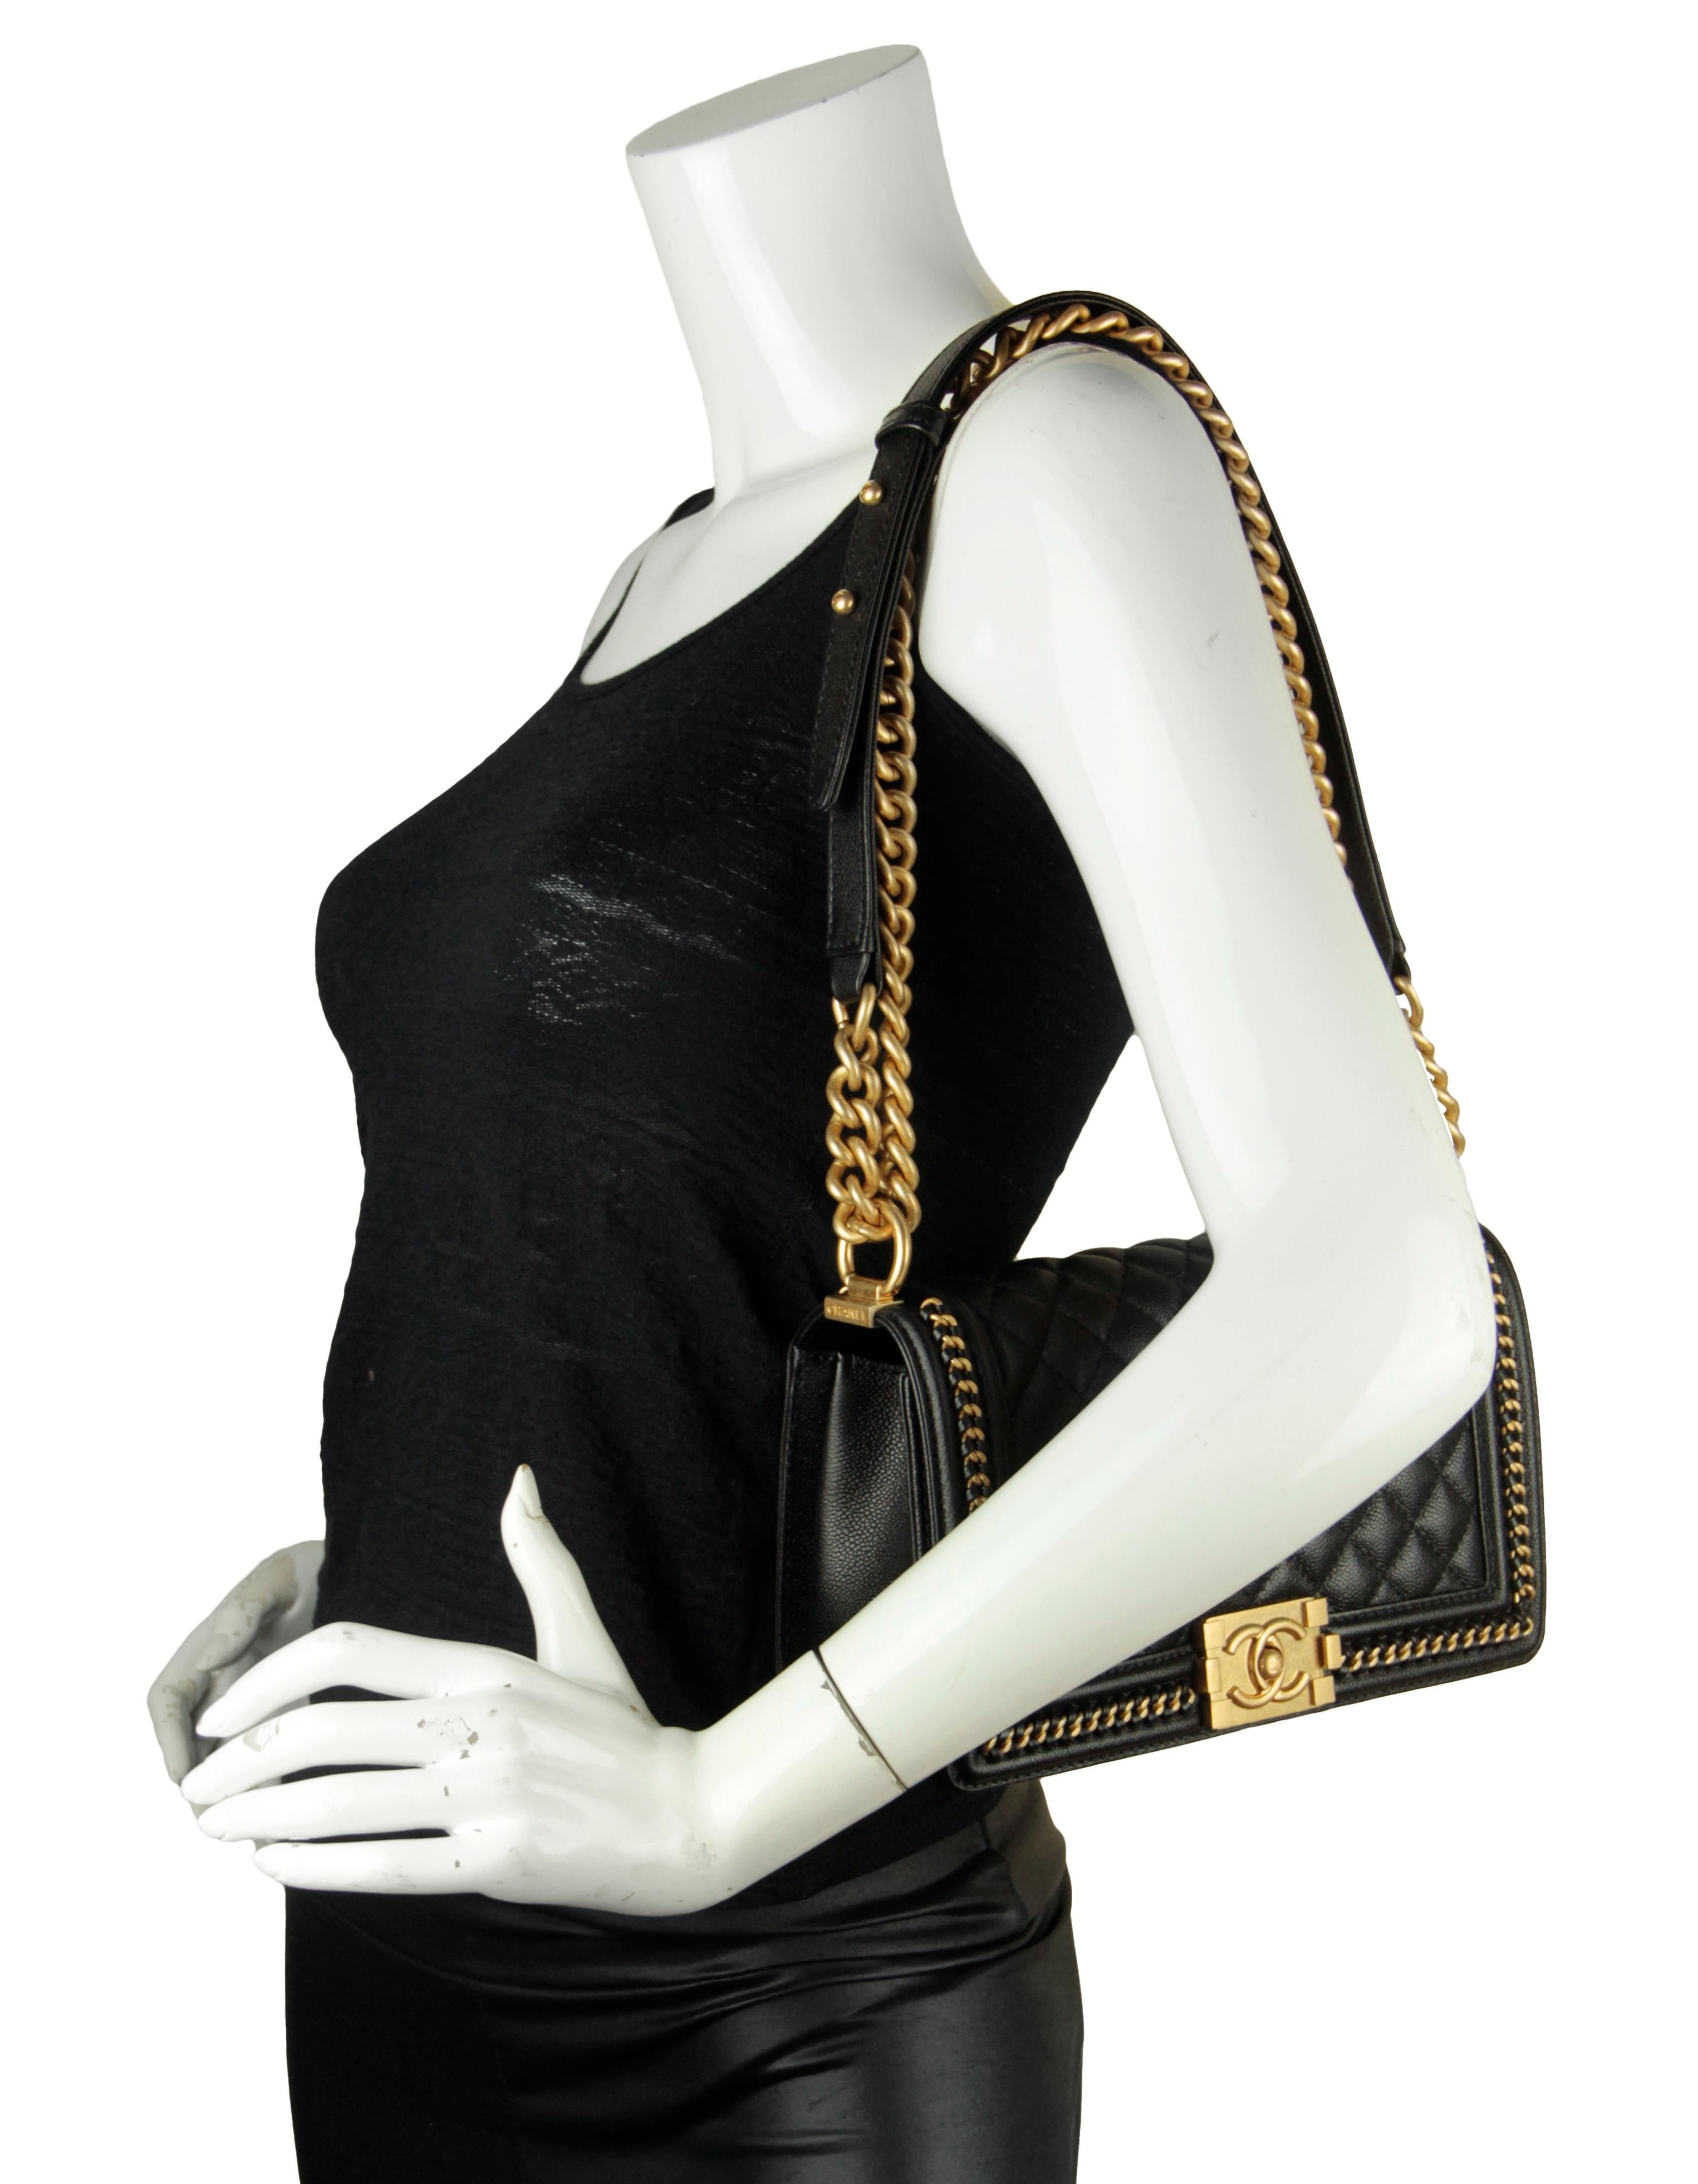 Chanel Black Caviar Quilted Medium Chain Through Boy Flap
Made In: France
Year of Production: 2021
Color: Black
Hardware: Goldtone
Materials: Caviar leather
Lining: Grosgrain
Closure/Opening: Flap top with CC pushlock
Exterior Pockets: None
Interior